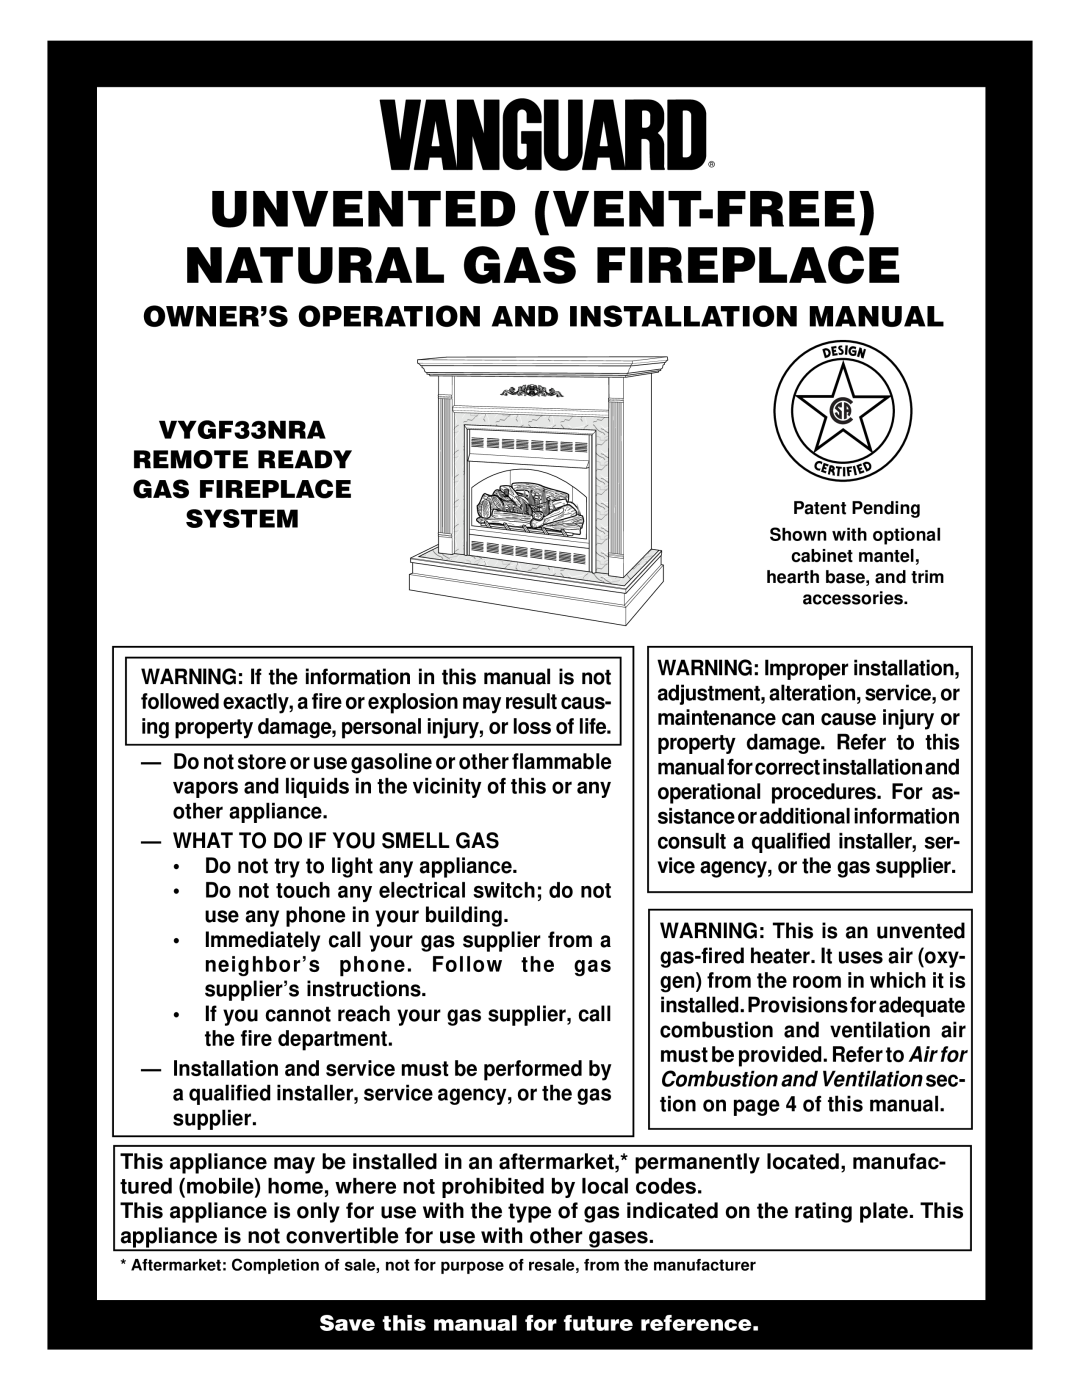 Vanguard Heating VYGF33NRA installation manual Owner’S Operation And Installation Manual, What To Do If You Smell Gas 